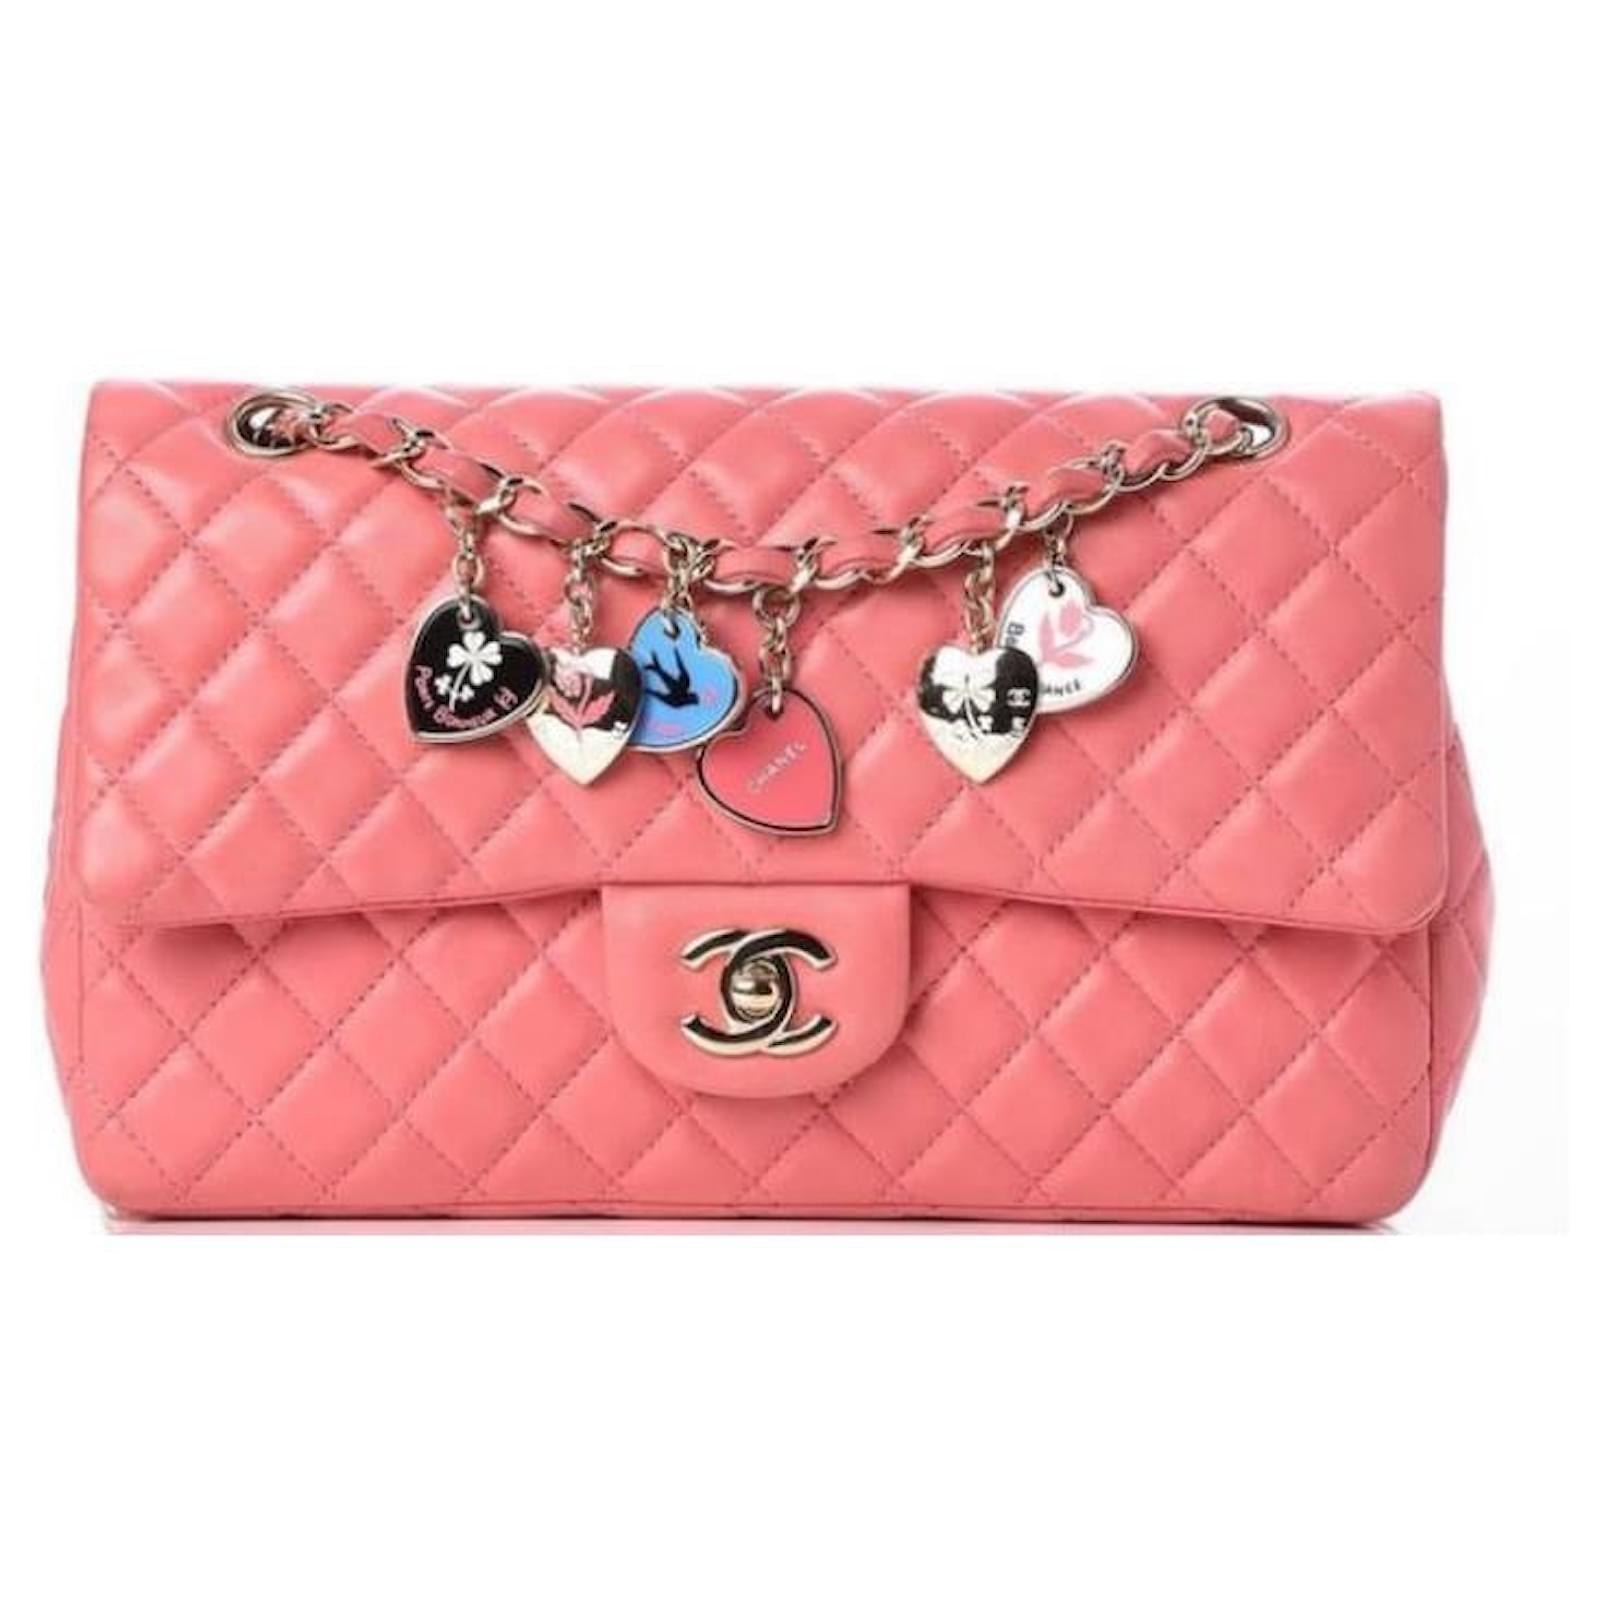 Handbags Chanel Chanel Pink Coral Medium Timeless Classic Limited Edition Quilted Lambskin Leather Valentines Heart Charms Flap Bag with Light